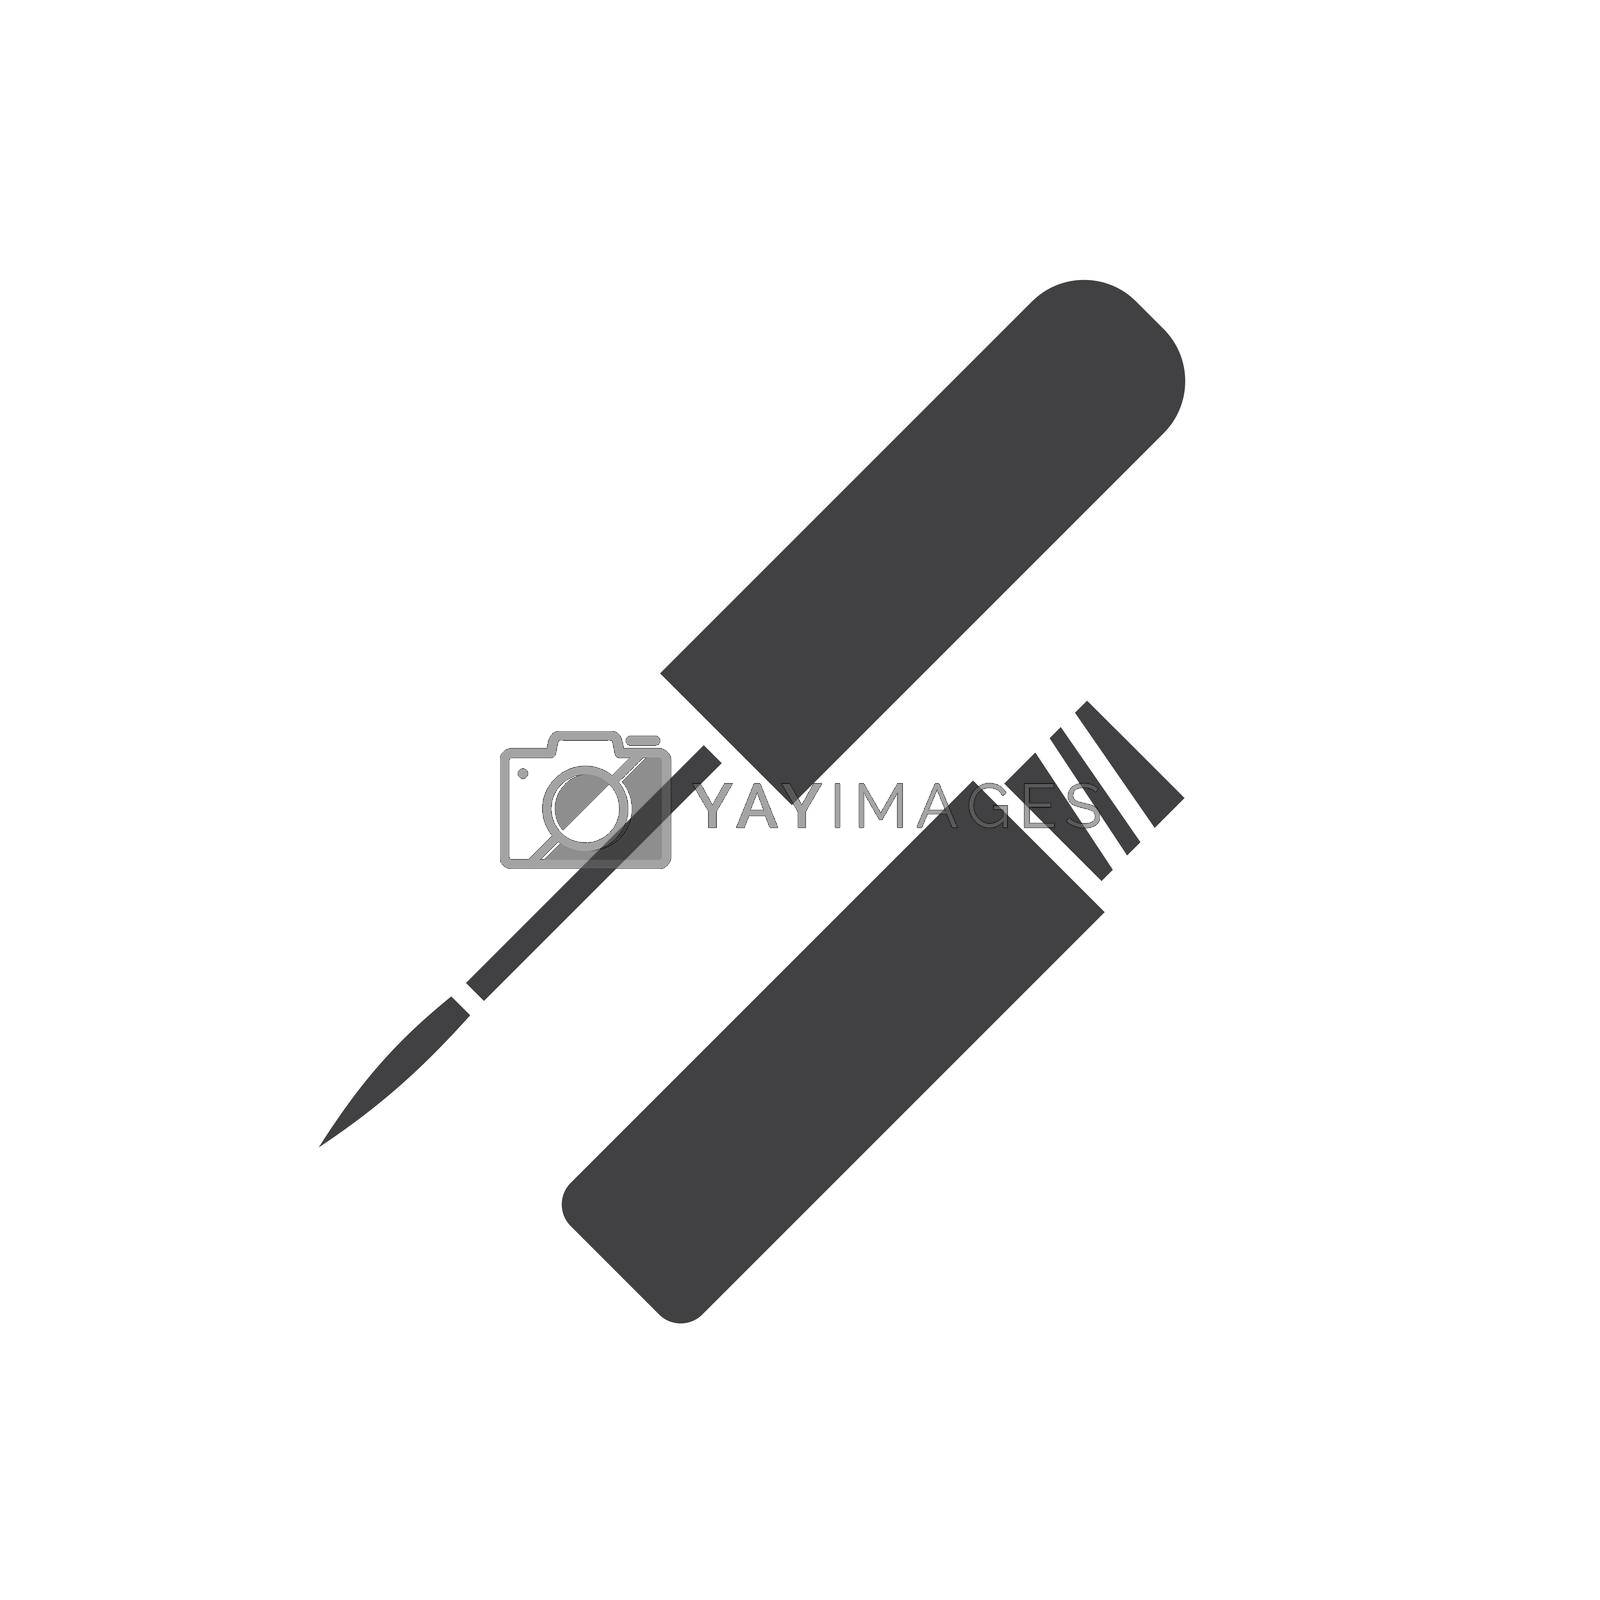 Royalty free image of Lip gloss glyph icon by bsd